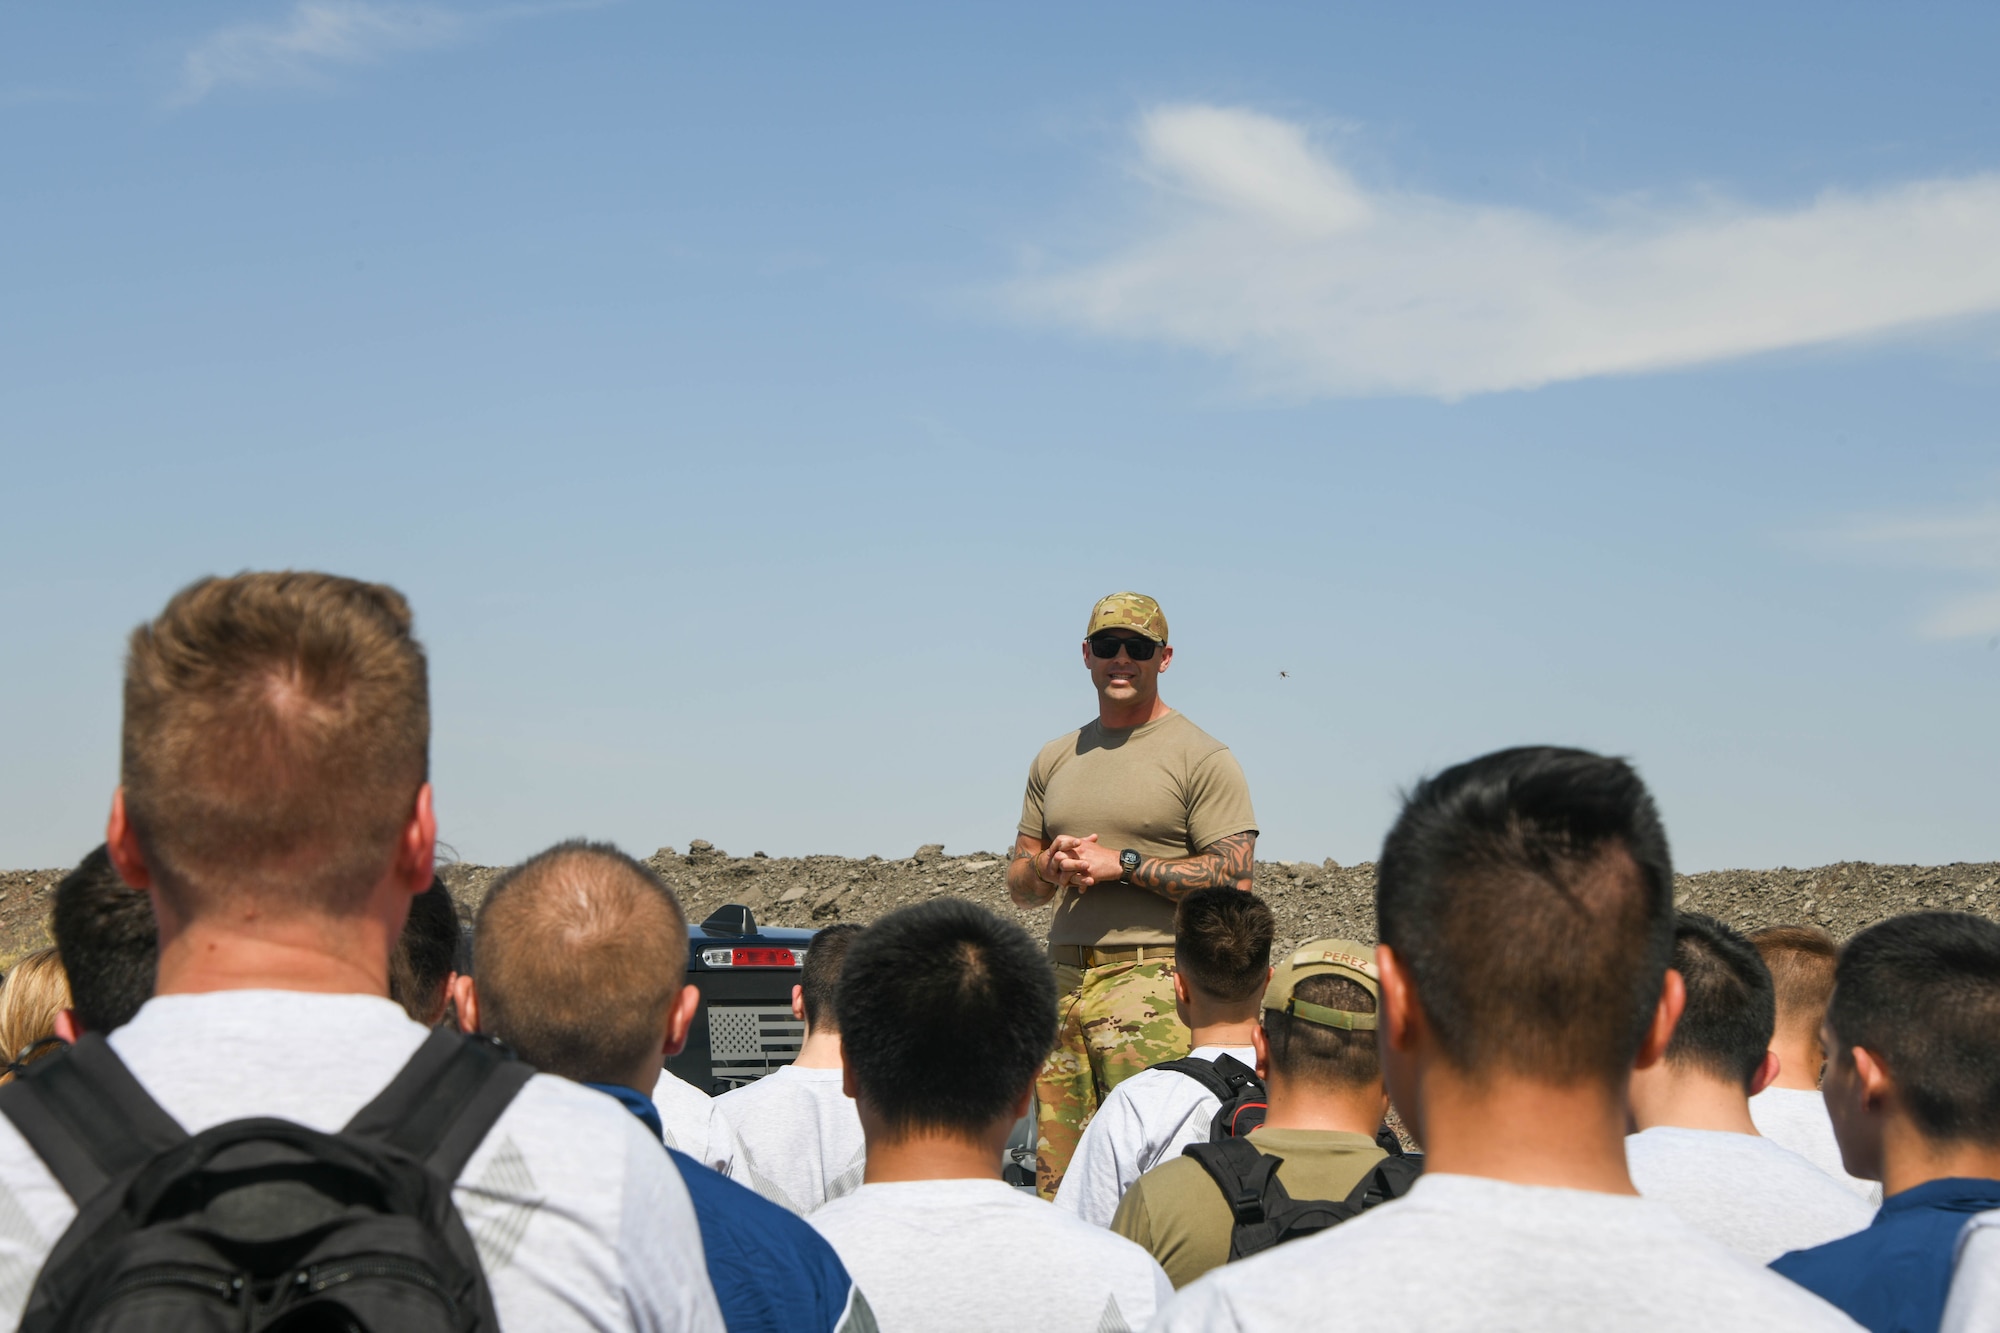 U.S. Air Force Senior Master Sgt. Jamie Almquist, 97th Training Squadron (TRS) senior enlisted leader, briefs students at the Talon Challenge at Altus Air Force Base, Oklahoma, April 10, 2022. The Talon Challenge was the first of its kind and will be held quarterly at the TRS. (U.S. Air Force photo by Airman 1st Class Trenton Jancze)